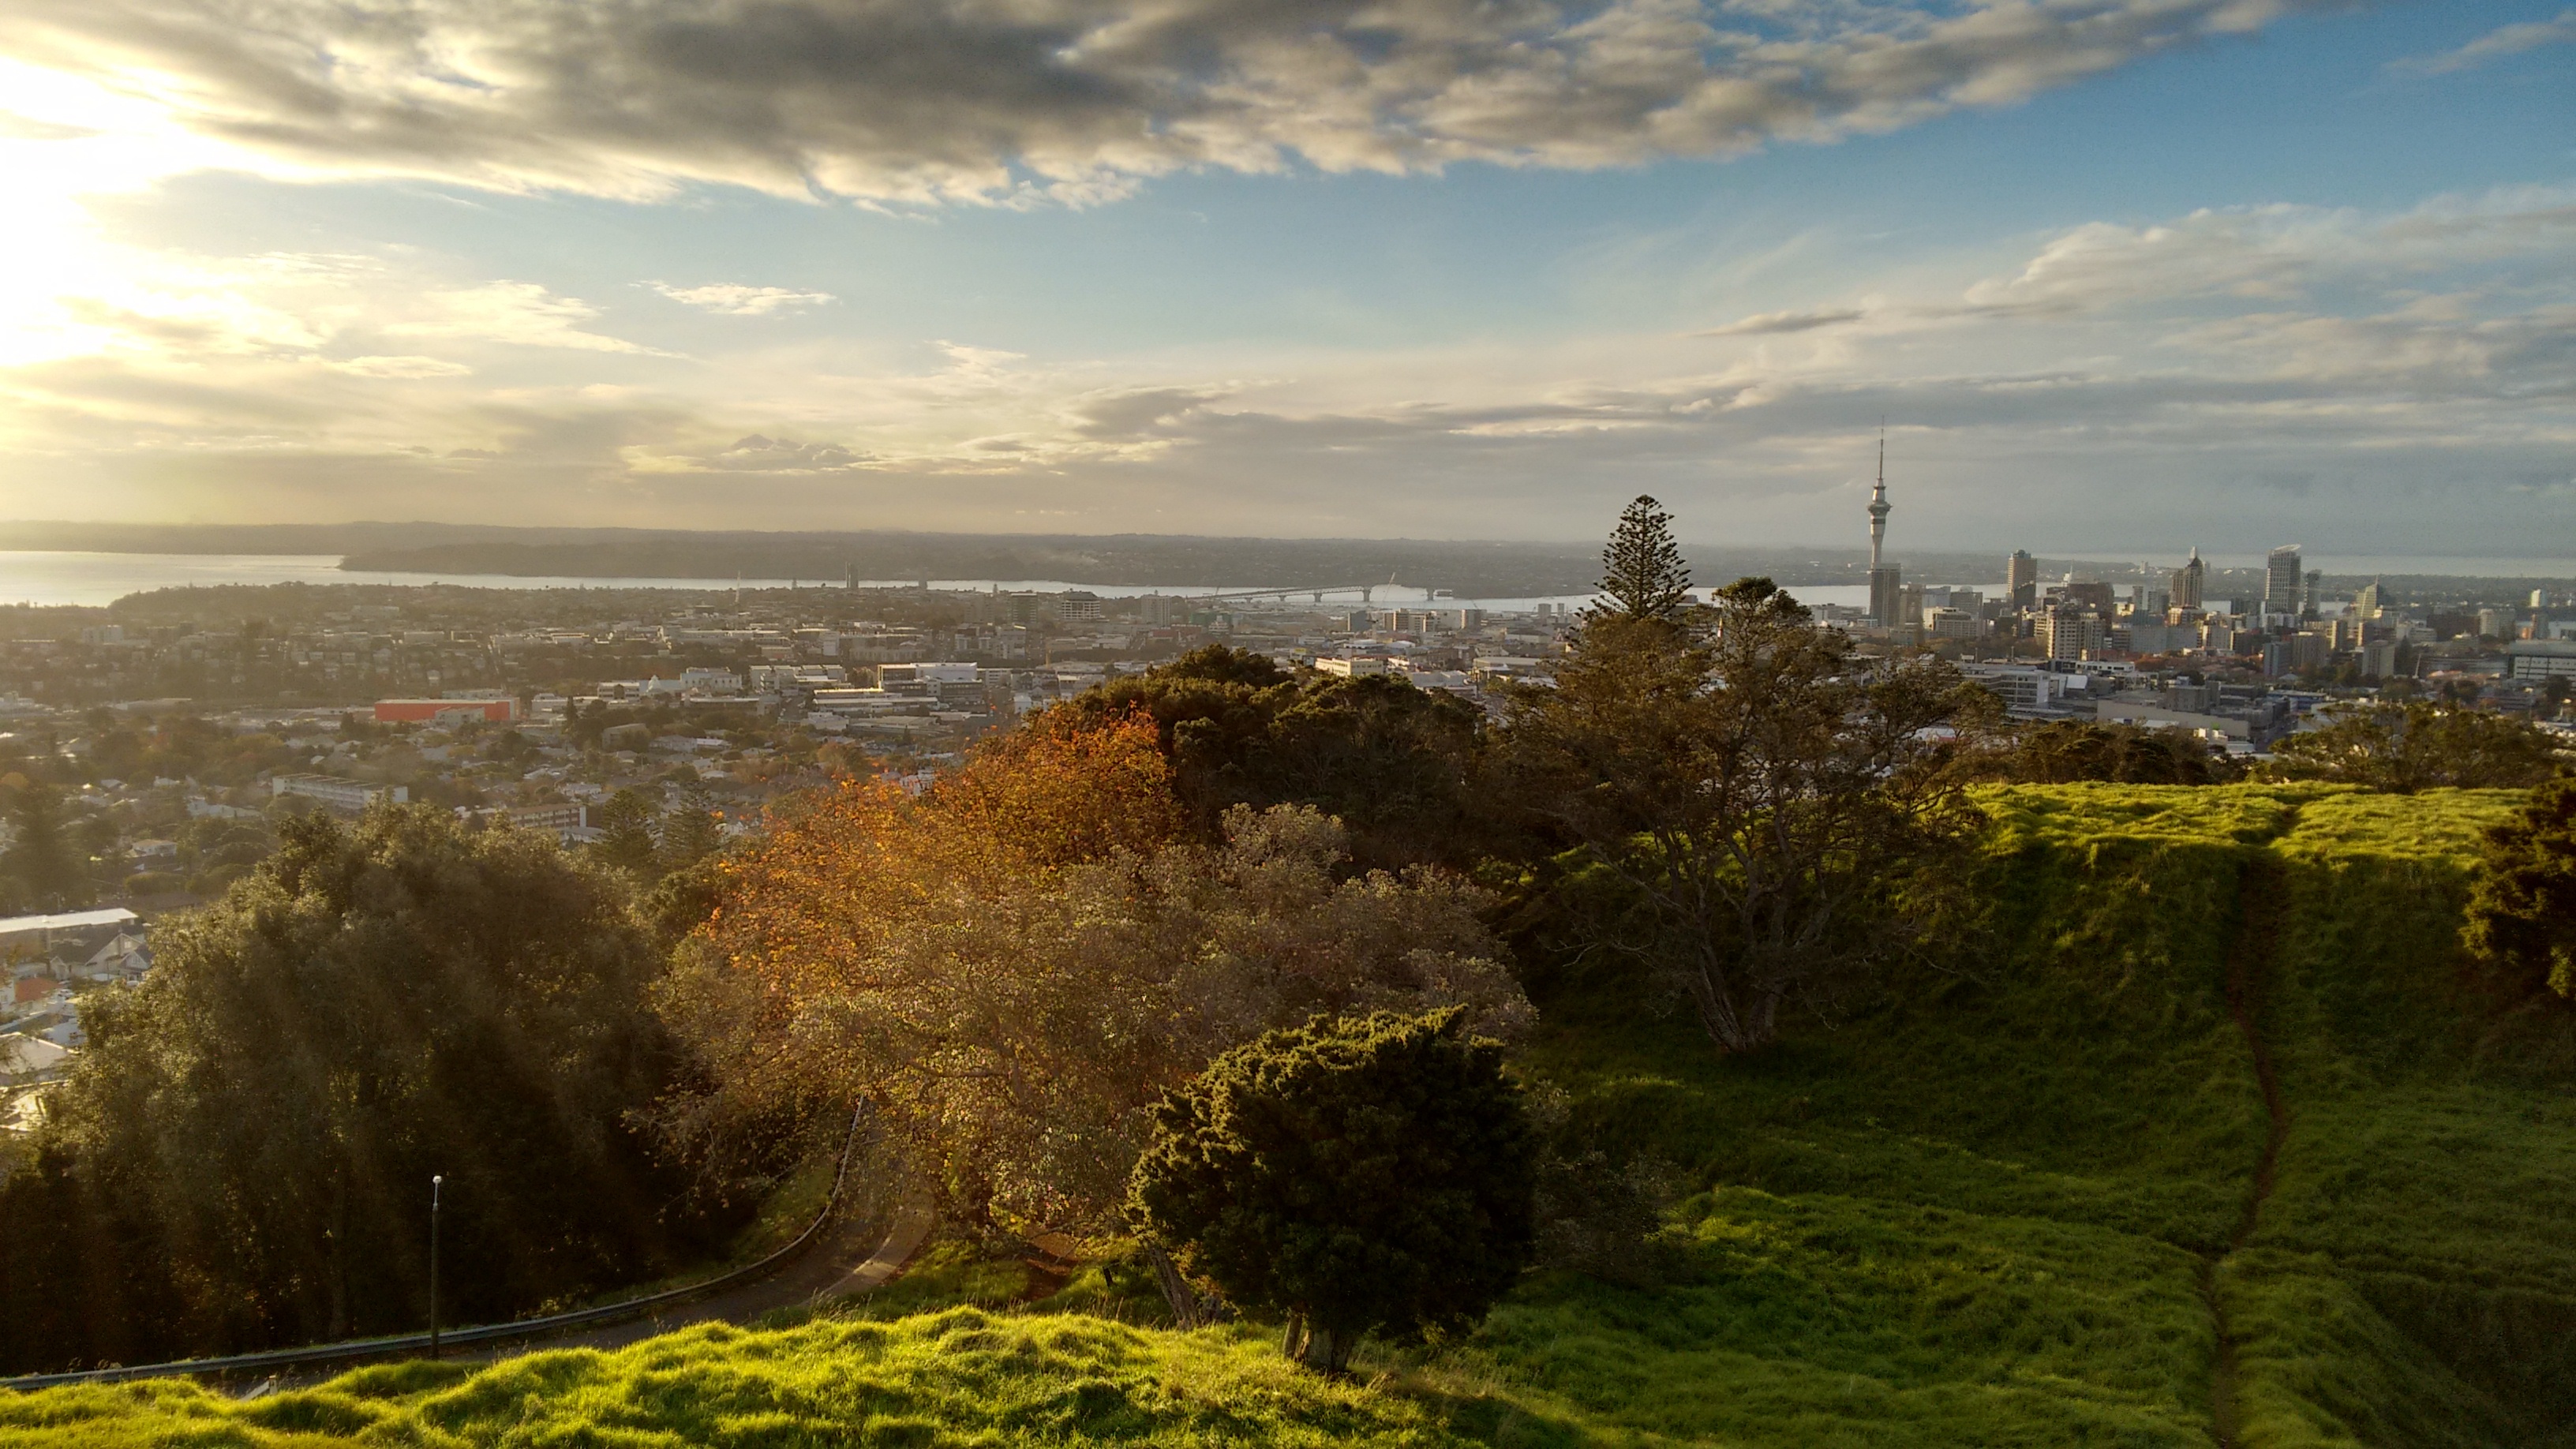 Auckland house listings surge as property prices flatten